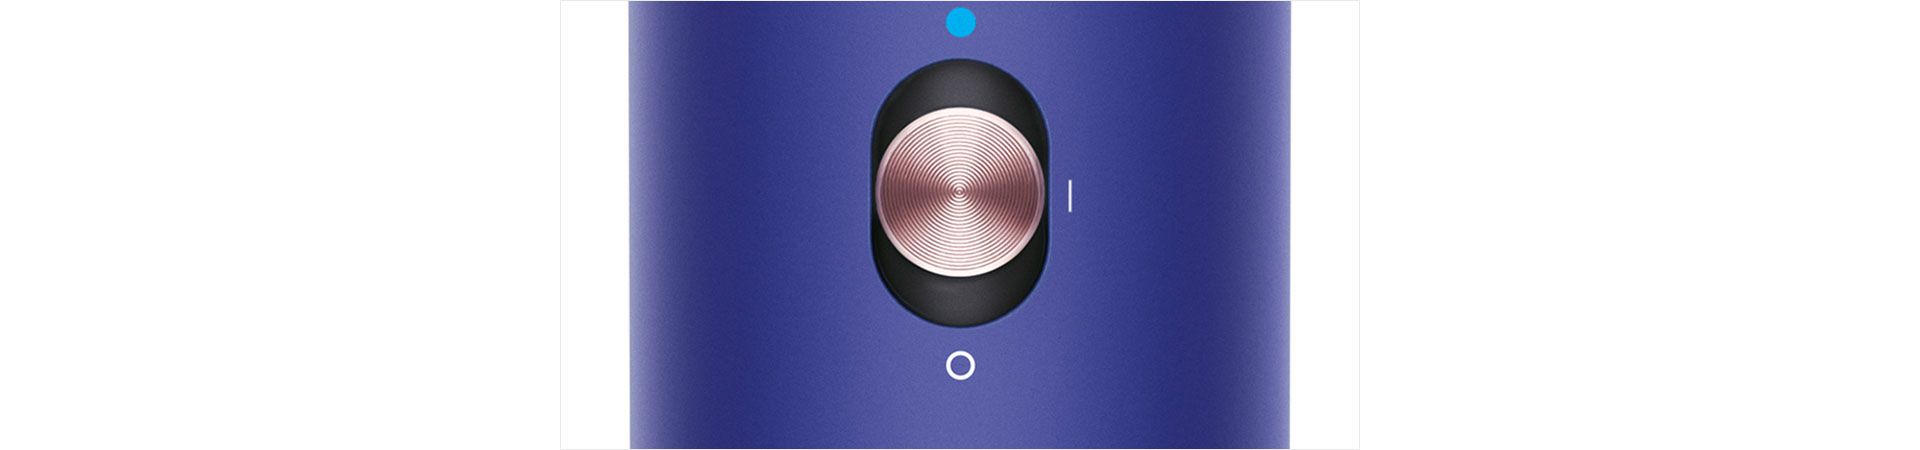 Close-up of cold shot button on Dyson Airwrap